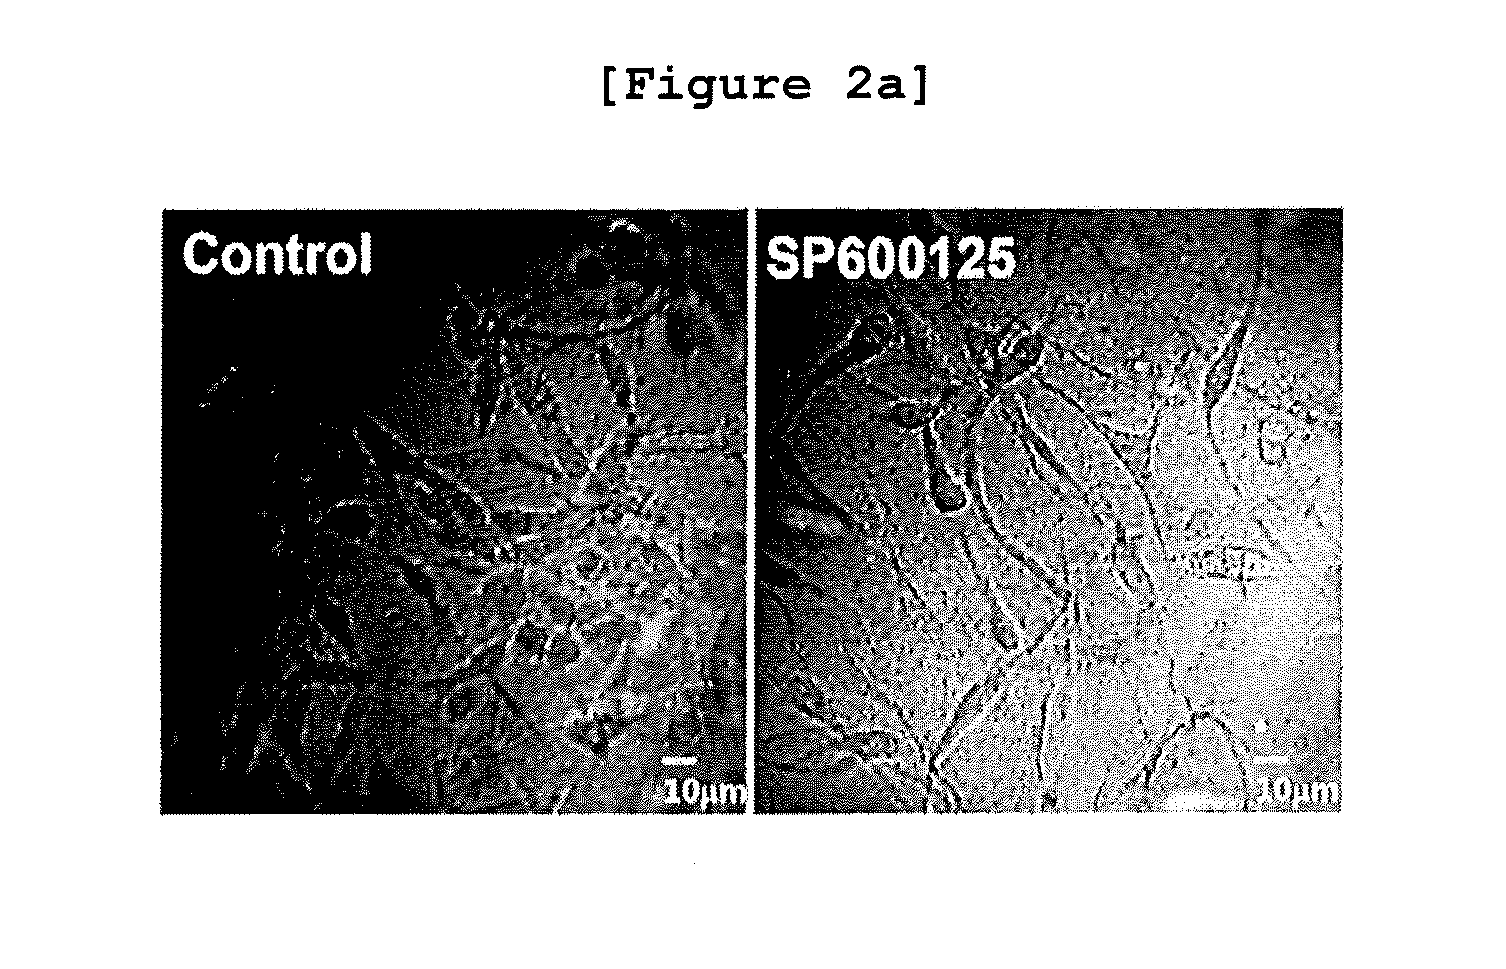 Method for monitoring metastasis of cancer cells using cells cultured in three dimensional collagen environment